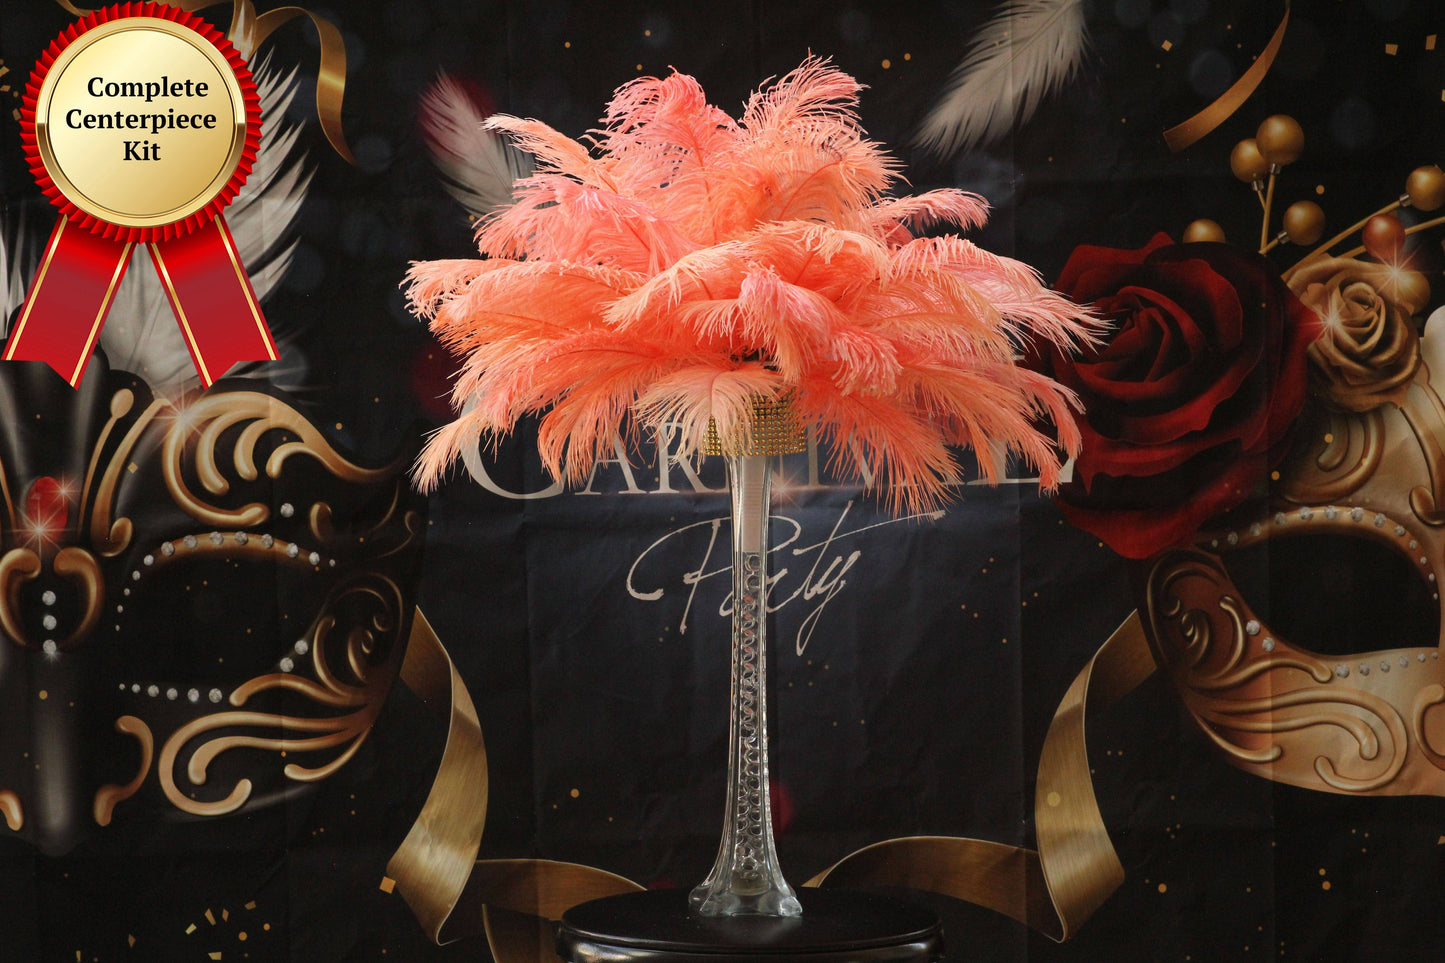 Feathers For Centerpieces